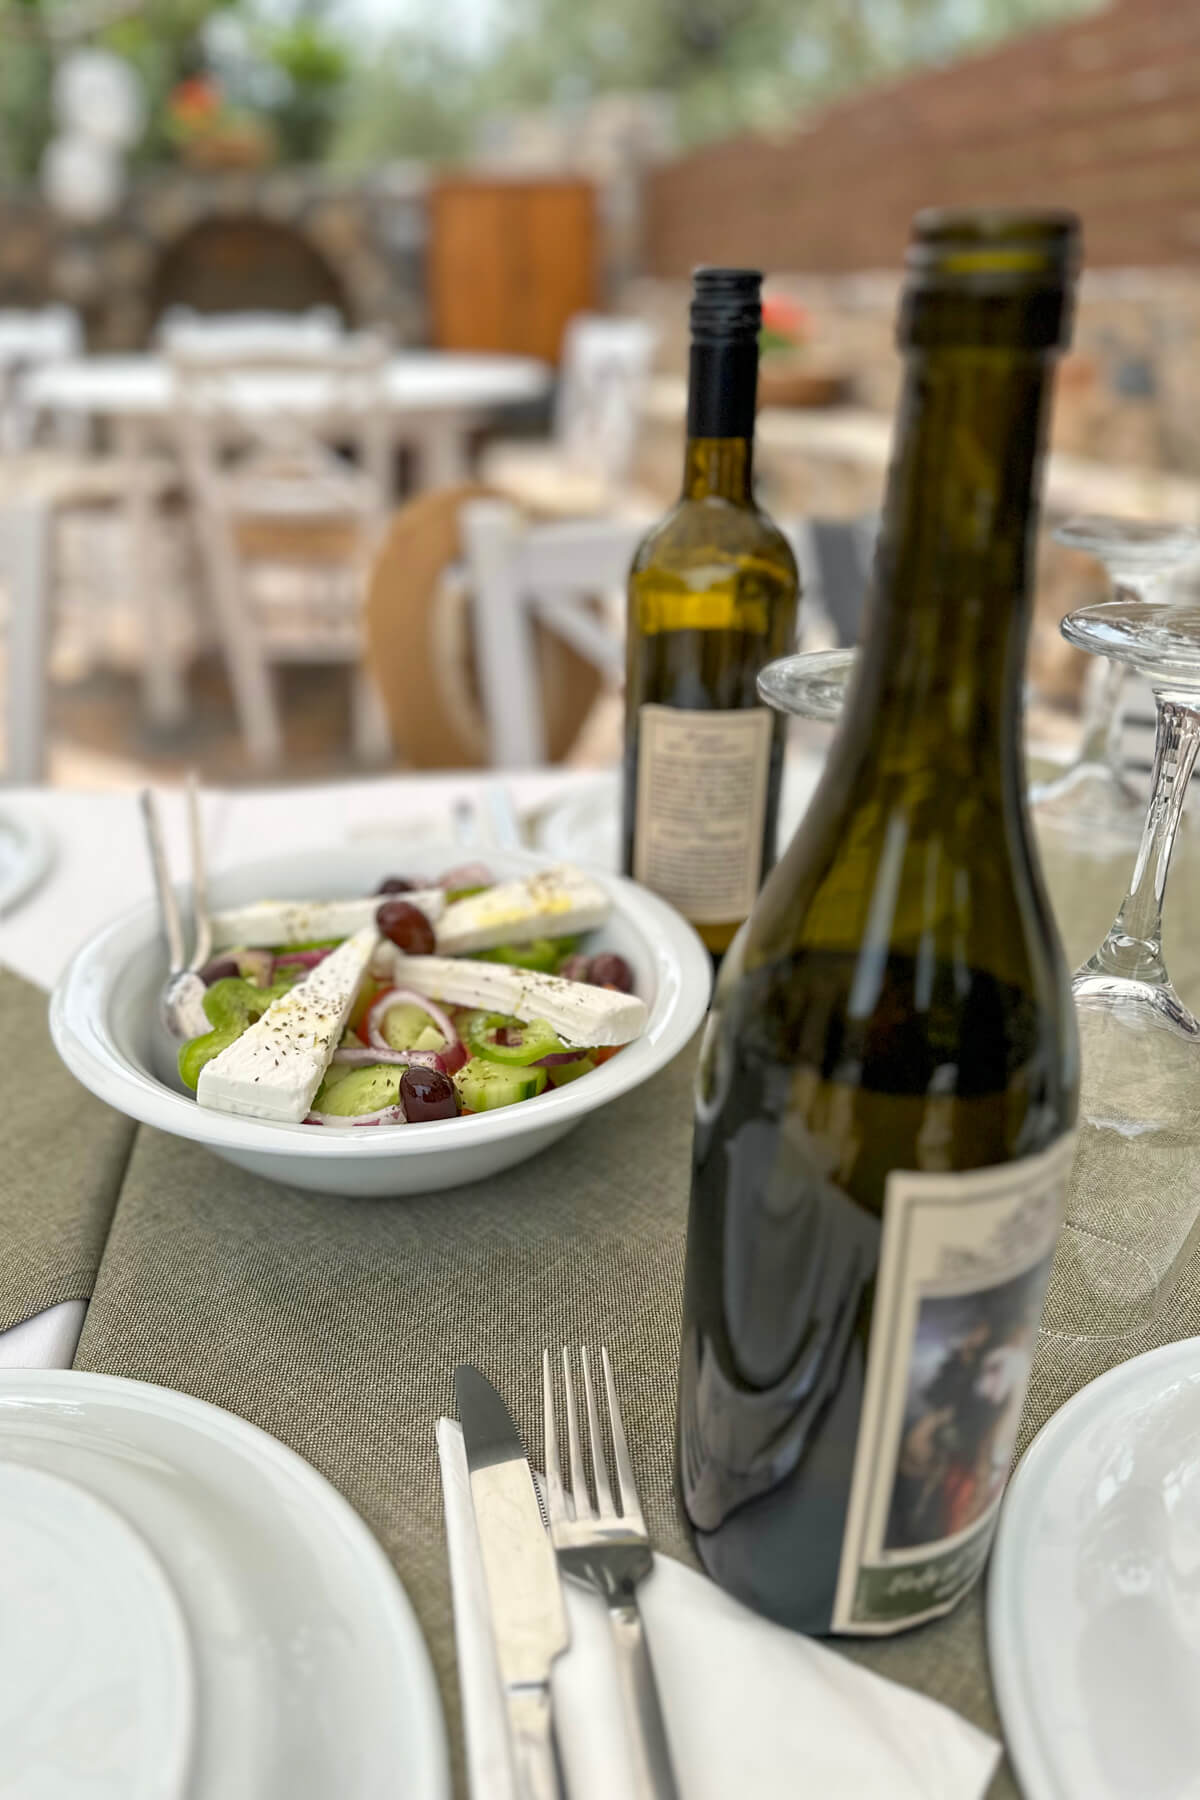 Bottles of wine set on a table with a Greek salad